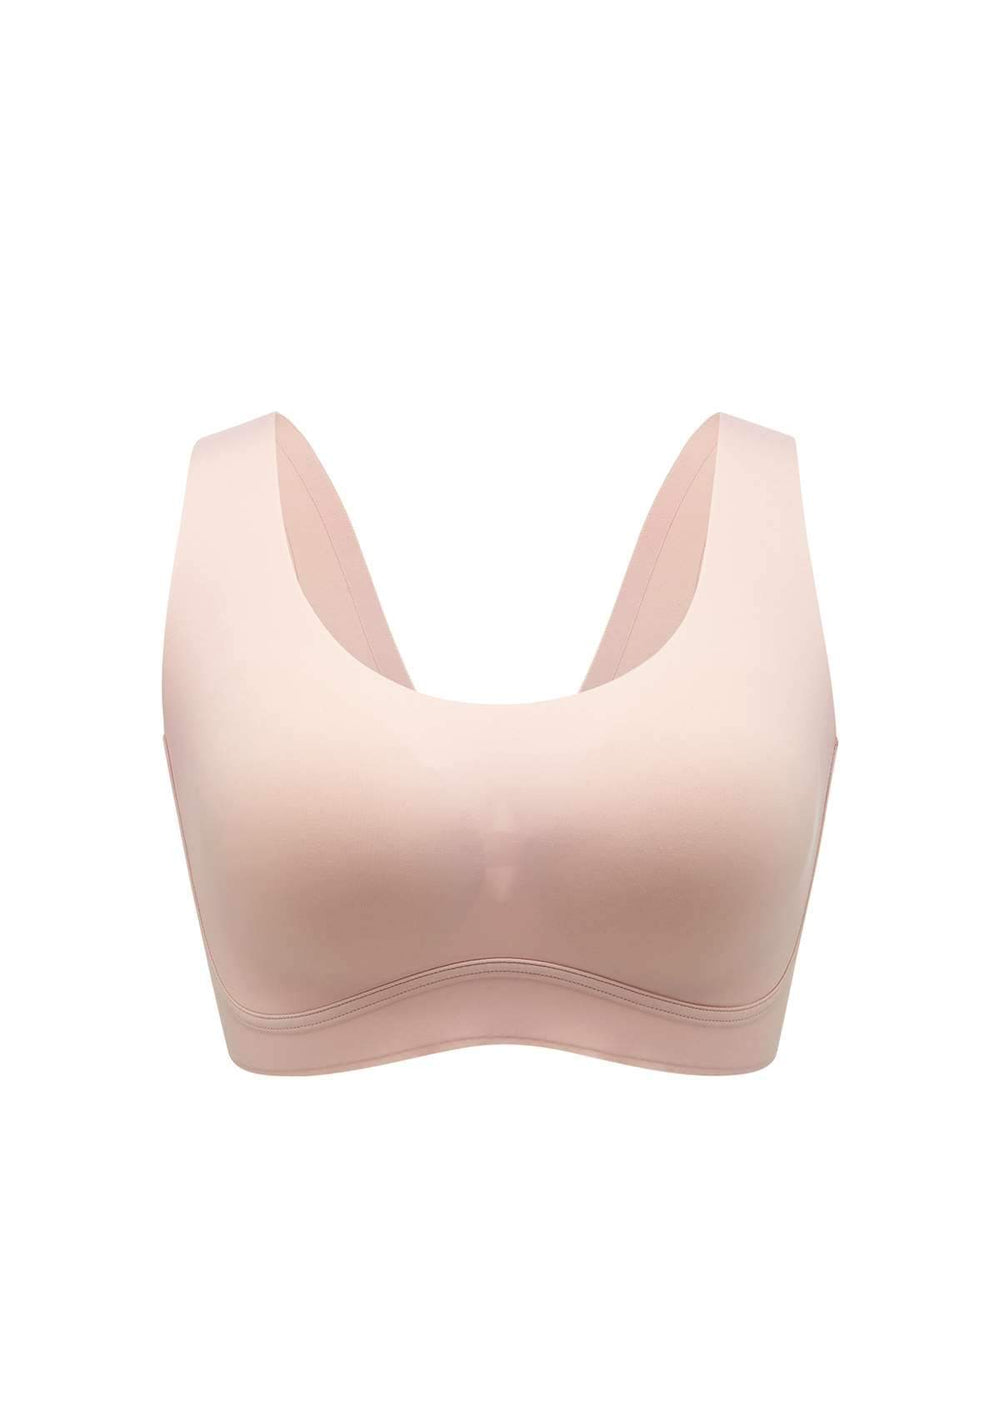 harmtty Women Solid Color Padded Wireless Seamless Bra Lace Push